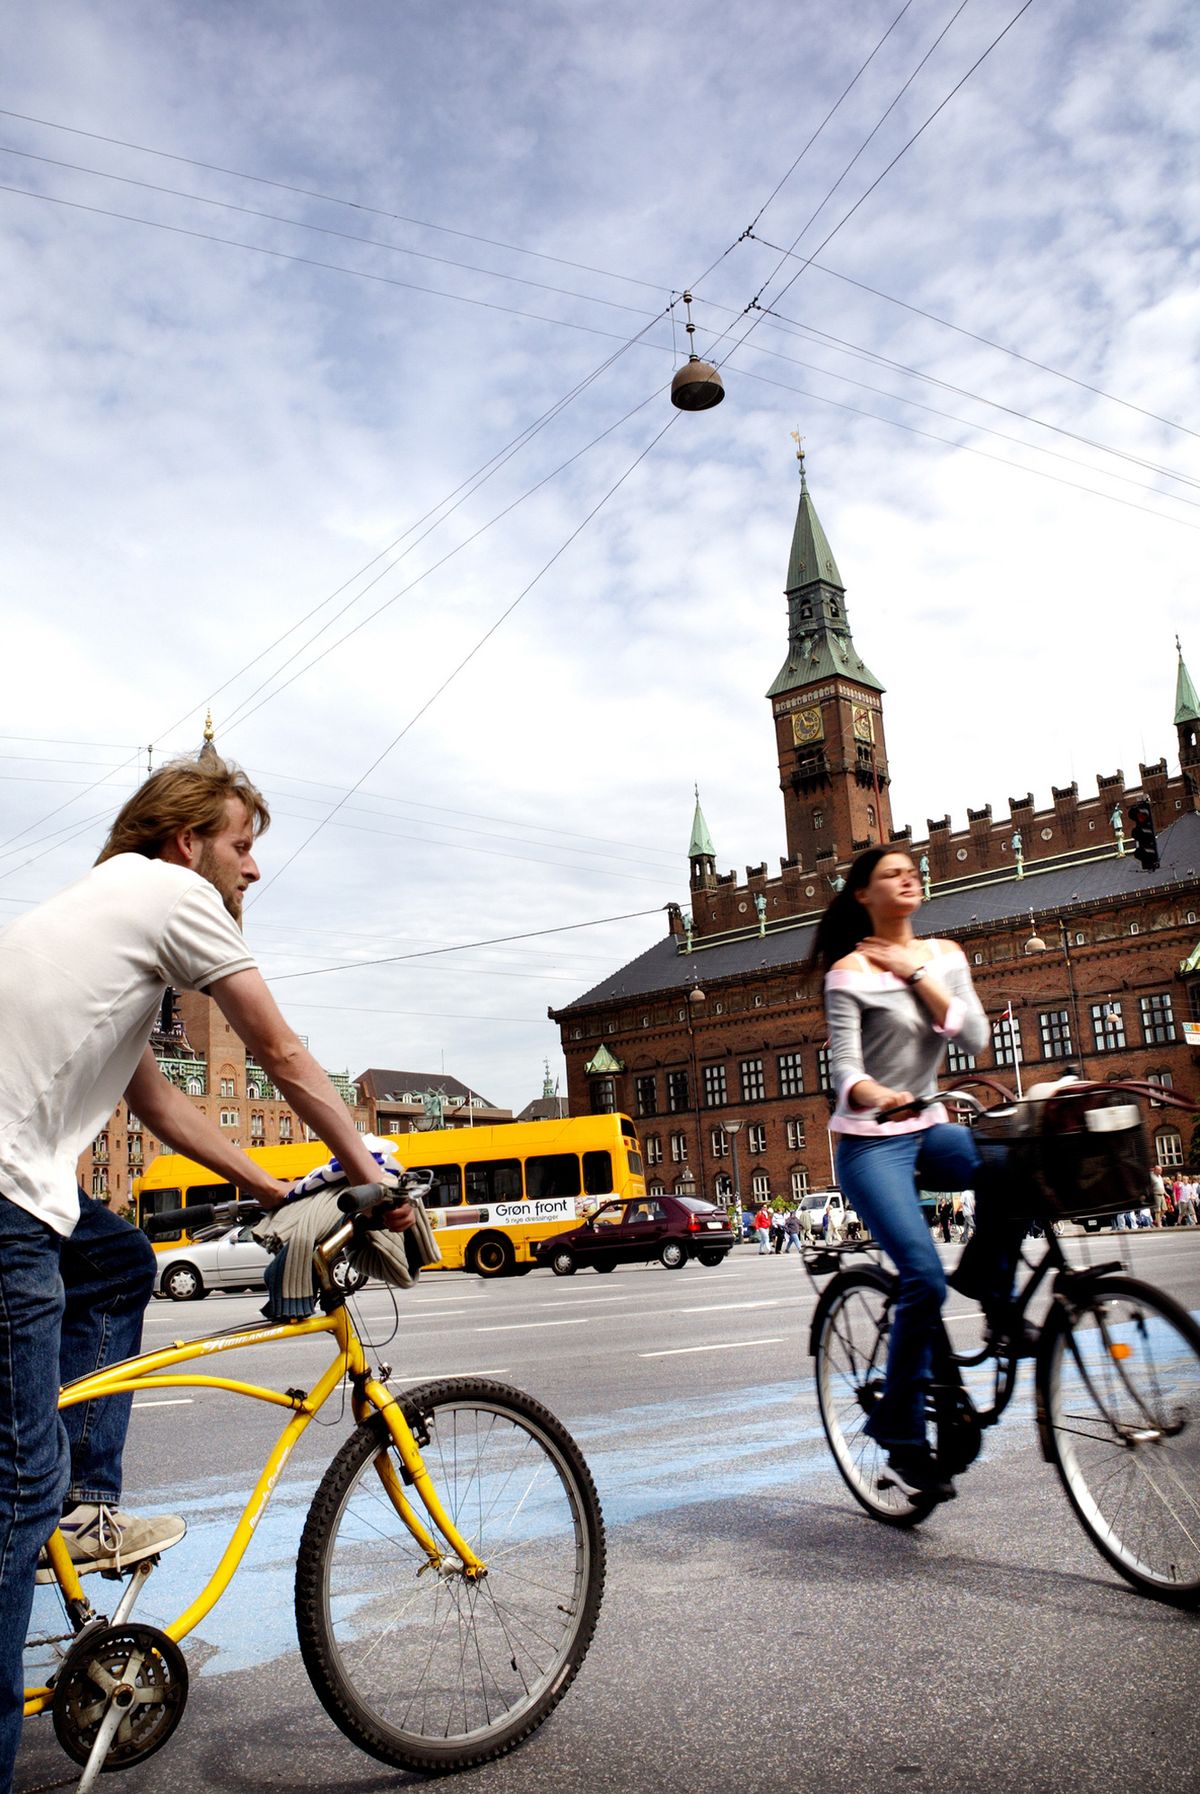 Copenhagen, the capital of Denmark, is flooded with cyclists. Denmark was picked the happiest nation in the world in a recent survey.Washington Post photos (Washington Post photos / The Spokesman-Review)